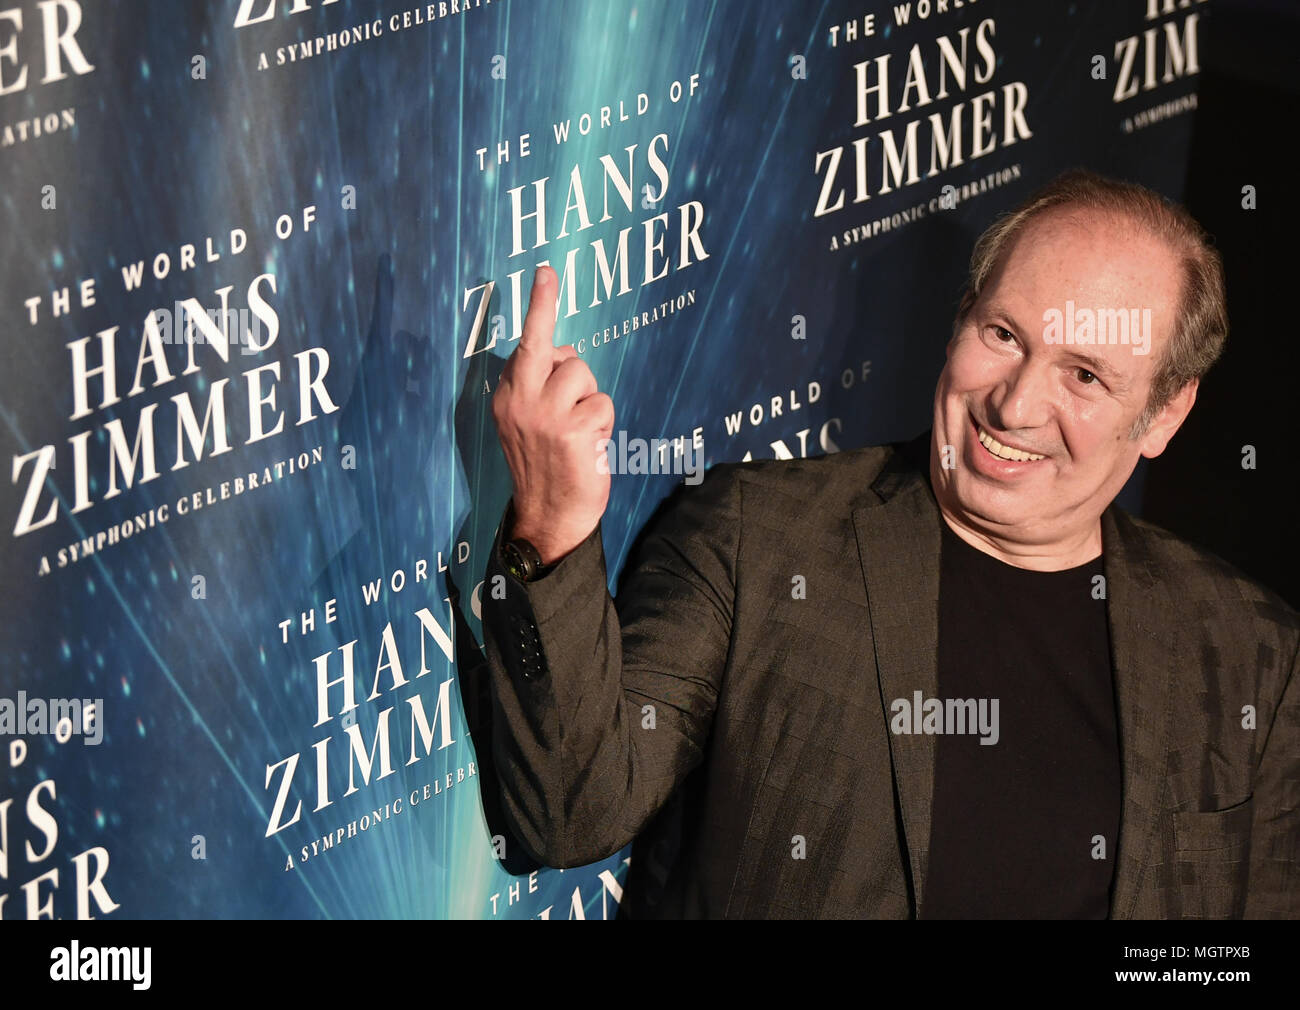 Berlin, Germany. 29 April 2018. Film music composer Hans Zimmer stands  during a press event on the Premiere The World of Hans Zimmer - A  Symphonic Celebration in the Mercedes-Benz Arena in